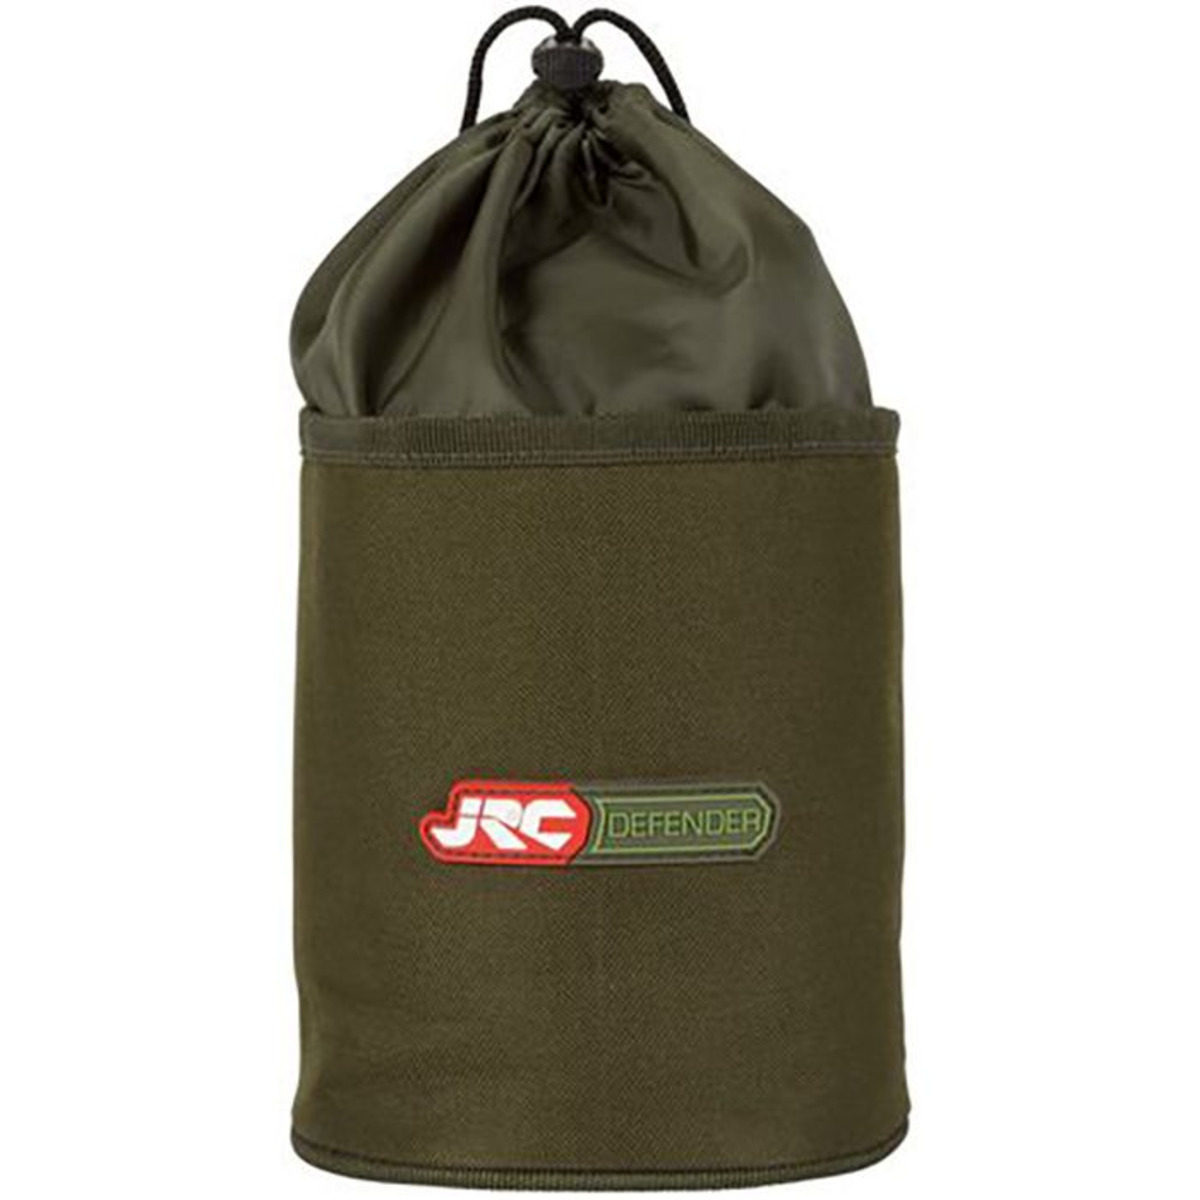 JRC Defender Gas Canister Pouch - 16x17 cm